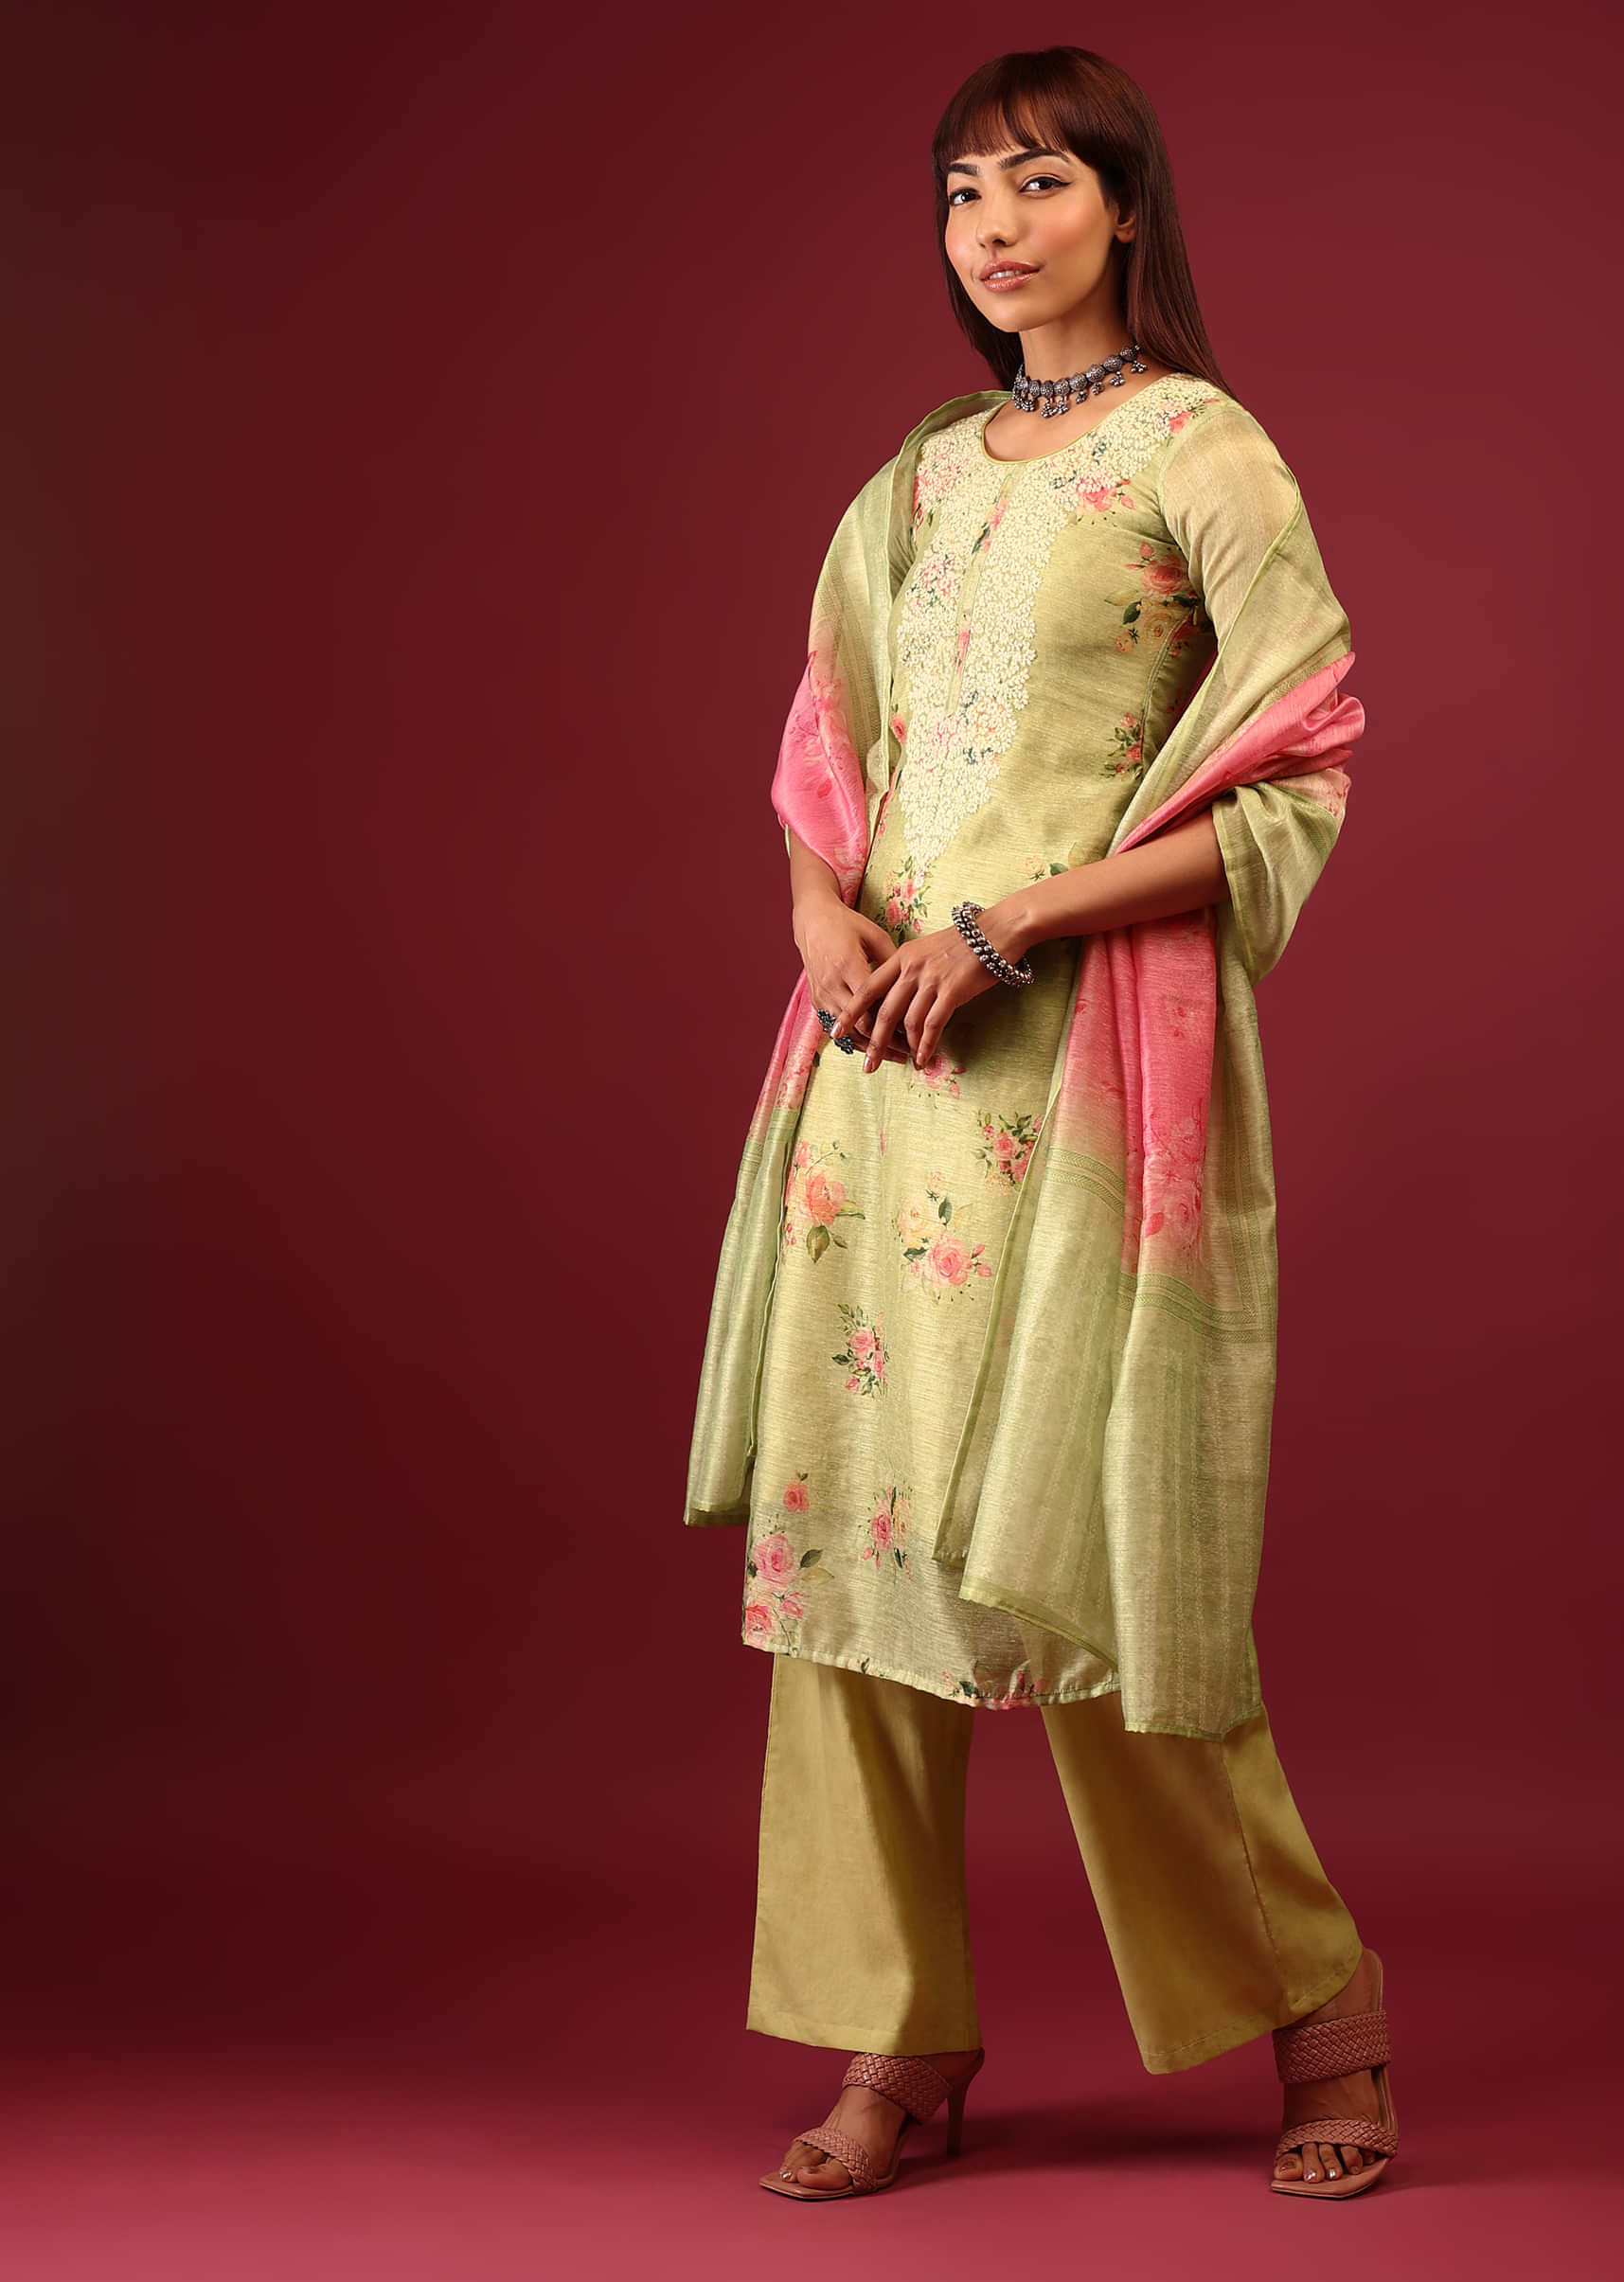 Celery Green Floral Print Palazzo Suit In U Neckline With Thread And Zari Embroidery